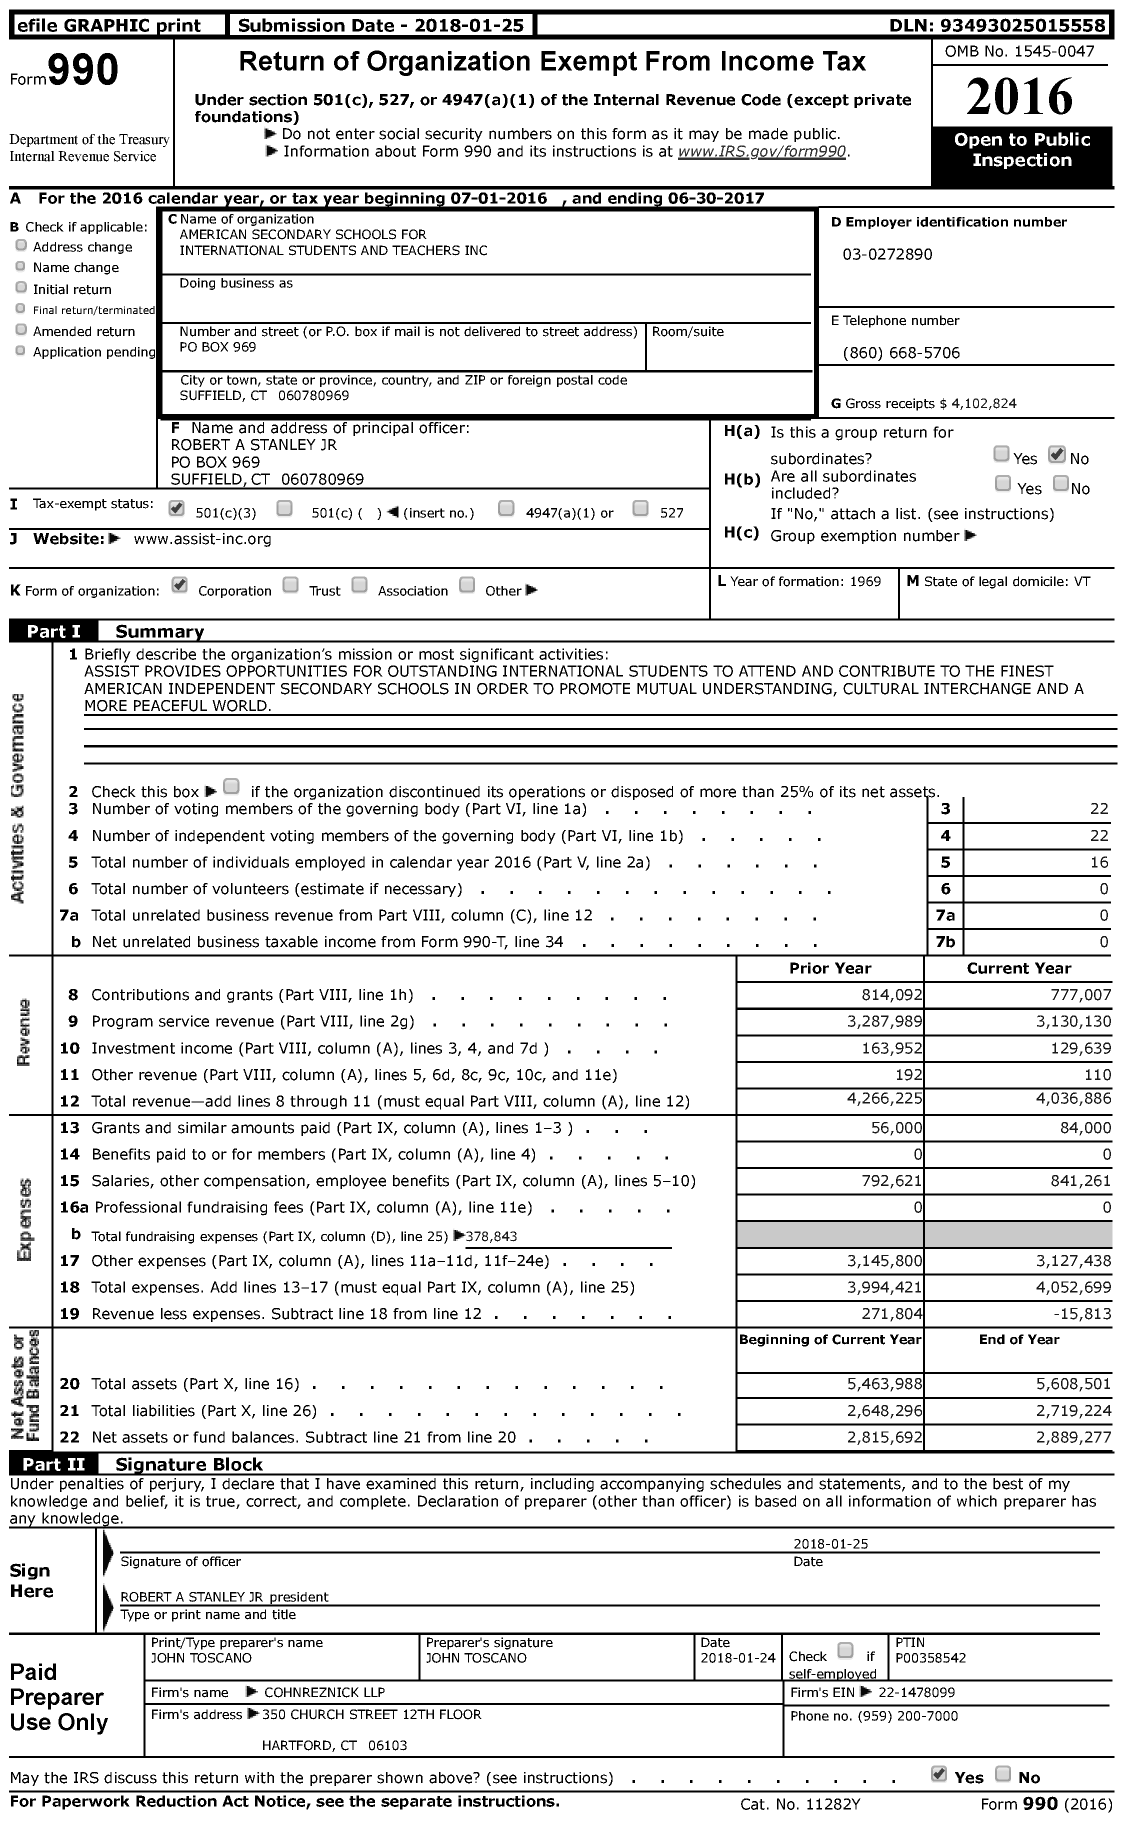 Image of first page of 2016 Form 990 for American Secondary Schools for International Students and Teachers (ASSIST)